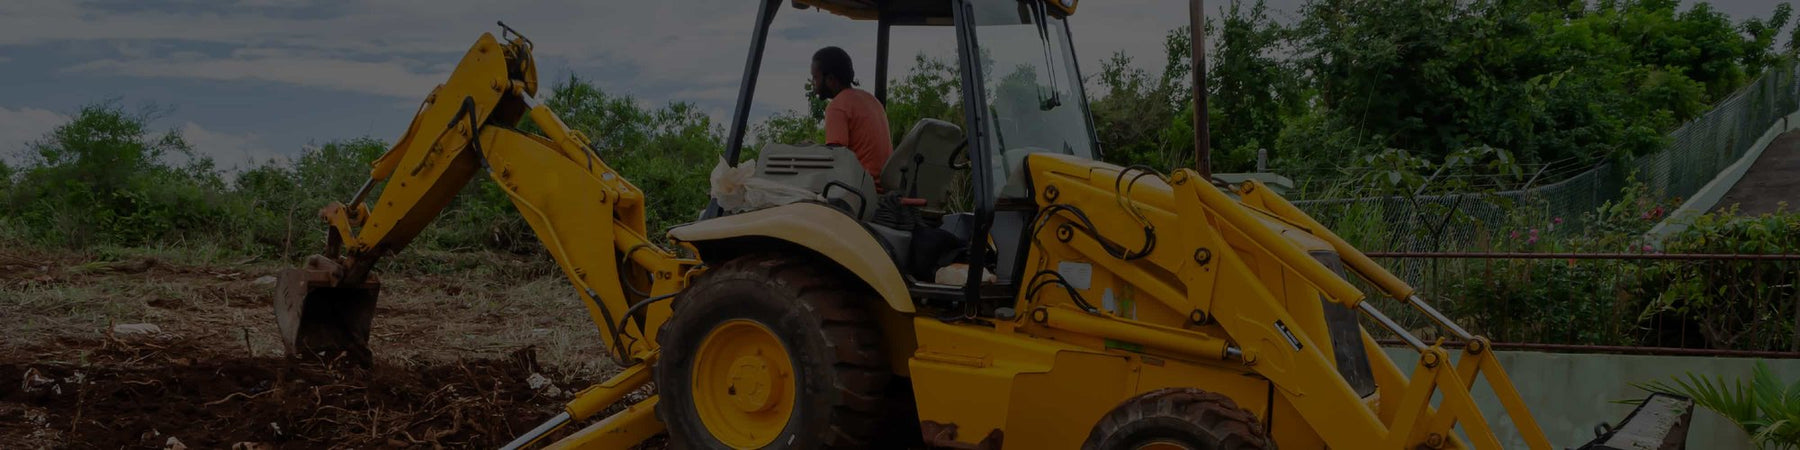 The 10 Best Backhoe Attachments and What They’re Used For